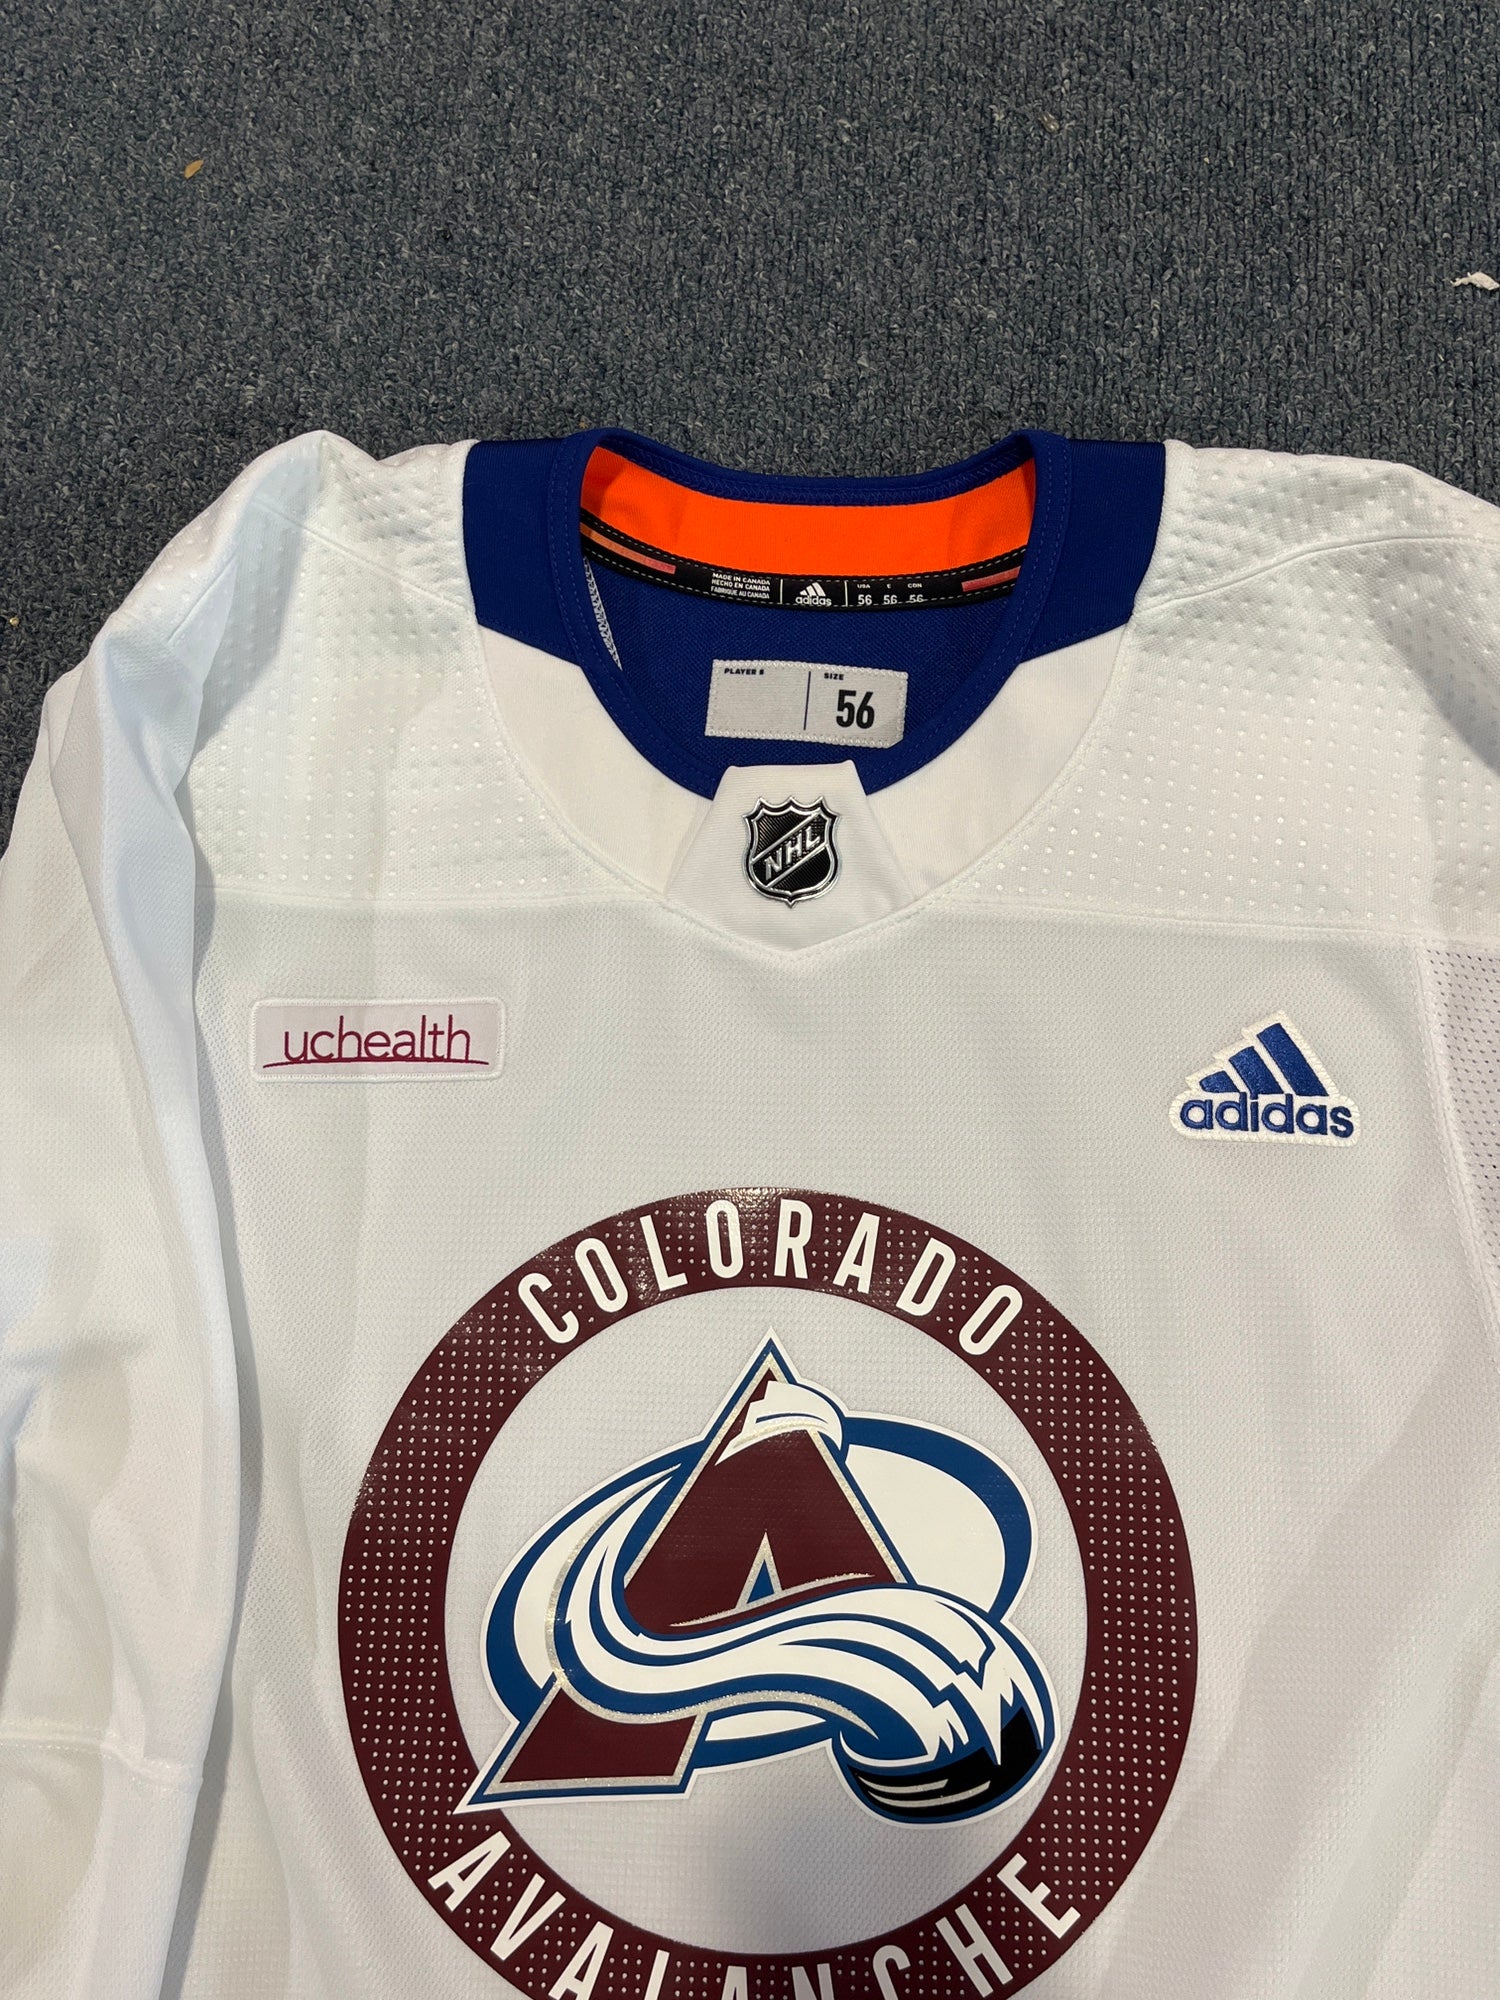 🏒New Adidas Sample Colorado Avalanche Basketball Jersey New with Tags Blue  &Red